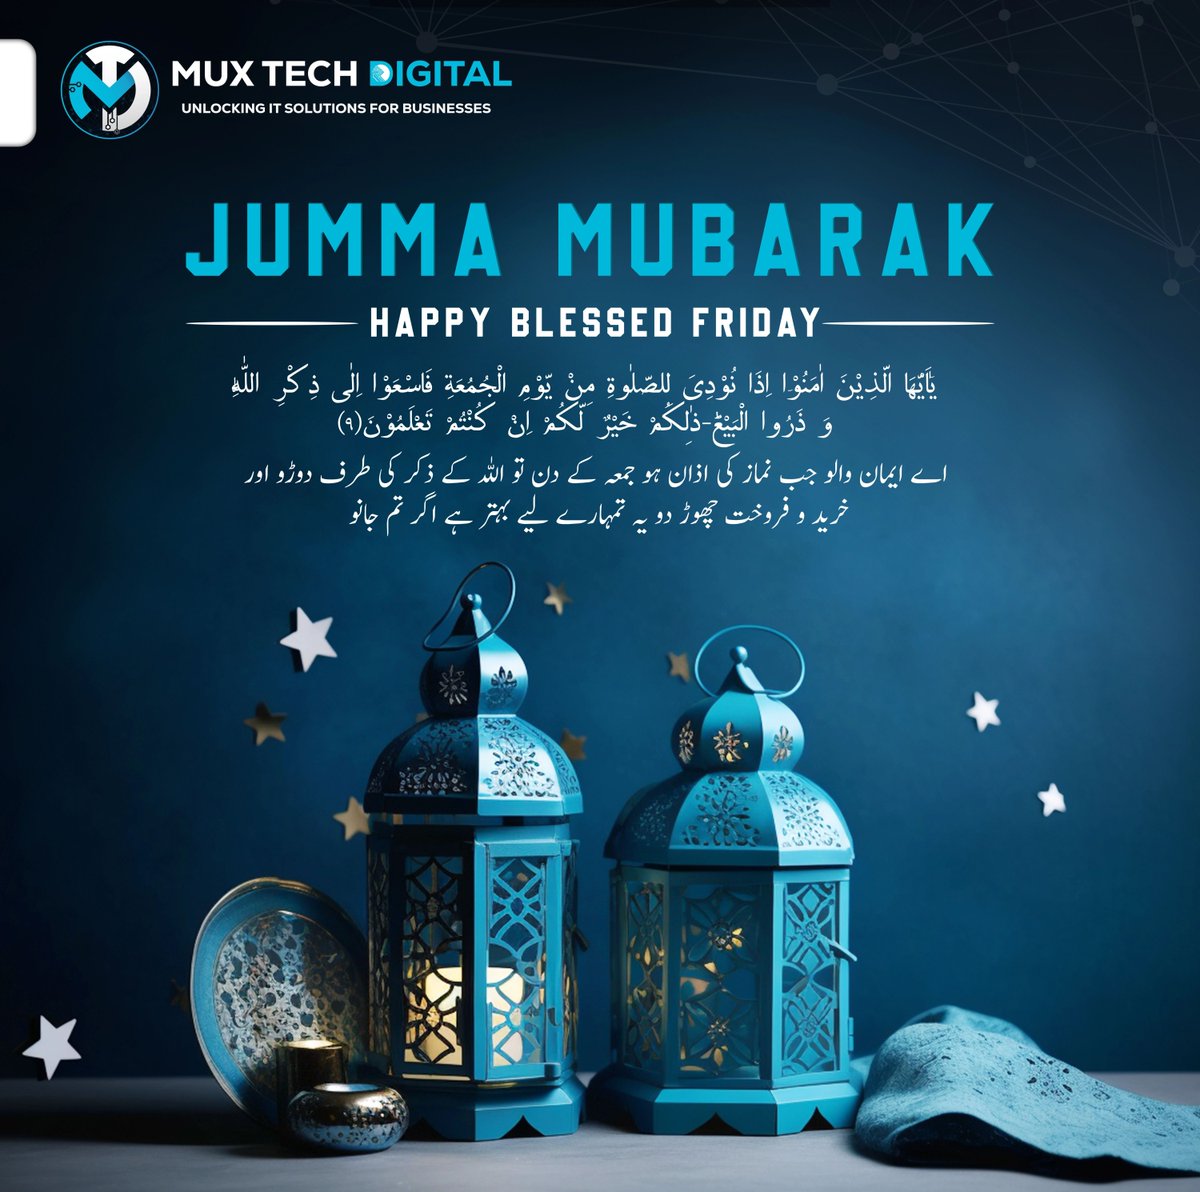 Jumma Mubarak! Happy Blessed Friday to all of us! May this Friday bring you peace, joy, and blessings.
#JummaMubarak #BlessedFriday #IslamicBlessings #PrayerTime #FaithfulMuslims  #BlessedFriday #ThankfulFriday #GratefulFriday #FridayBlessings #FridayVibes